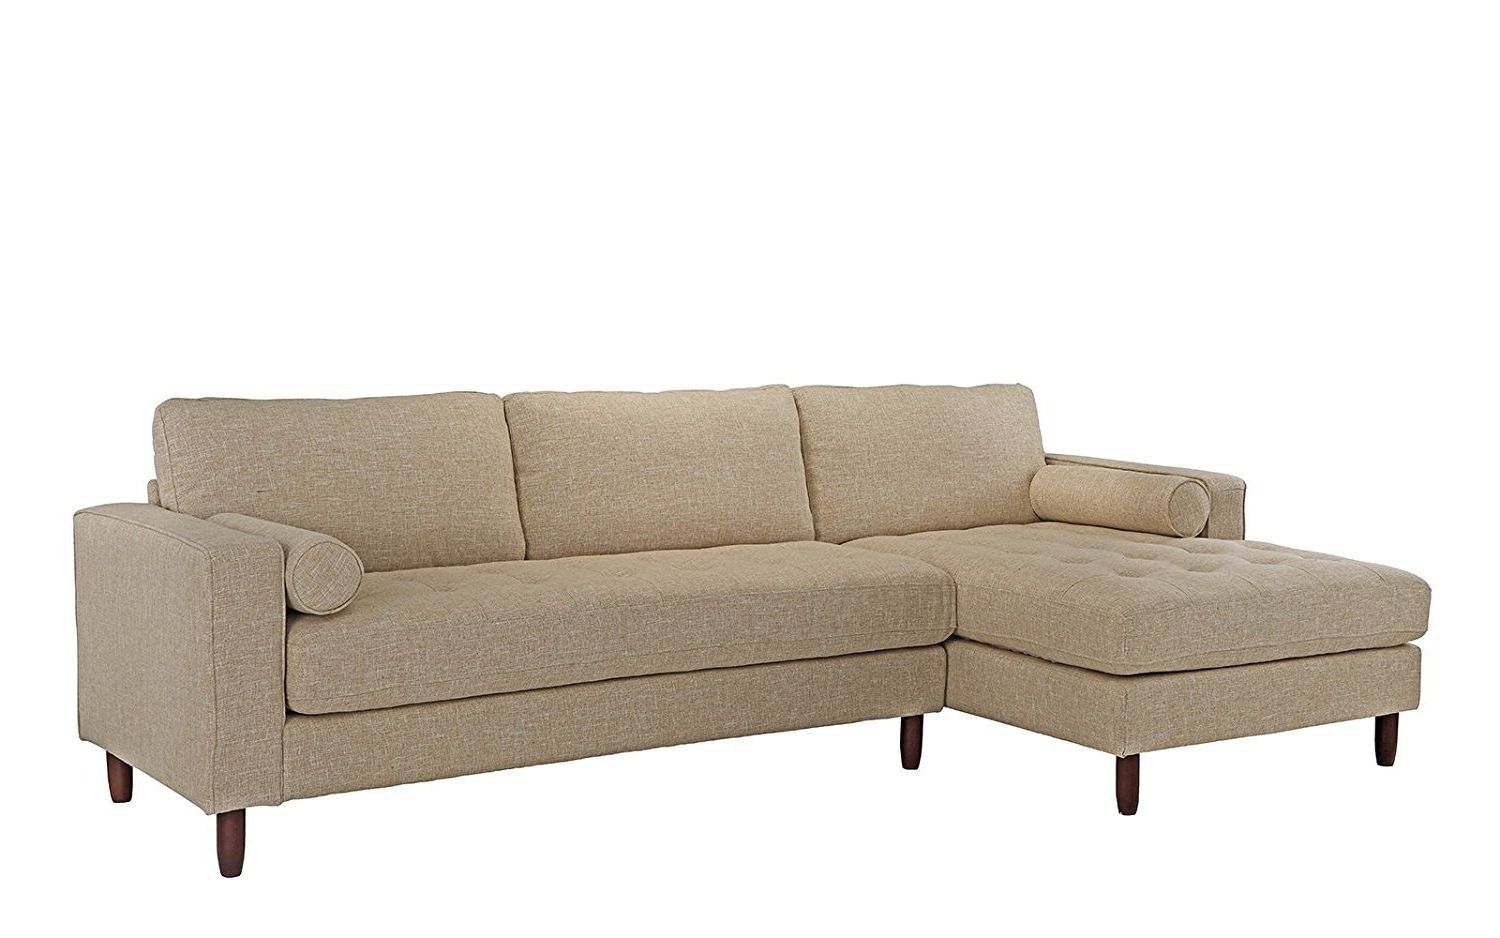 Favorite Mid Century Modern Tufted Fabric Sectional Sofa, L Shape Couch Beige Intended For Small L Shaped Sectional Sofas In Beige (View 12 of 15)